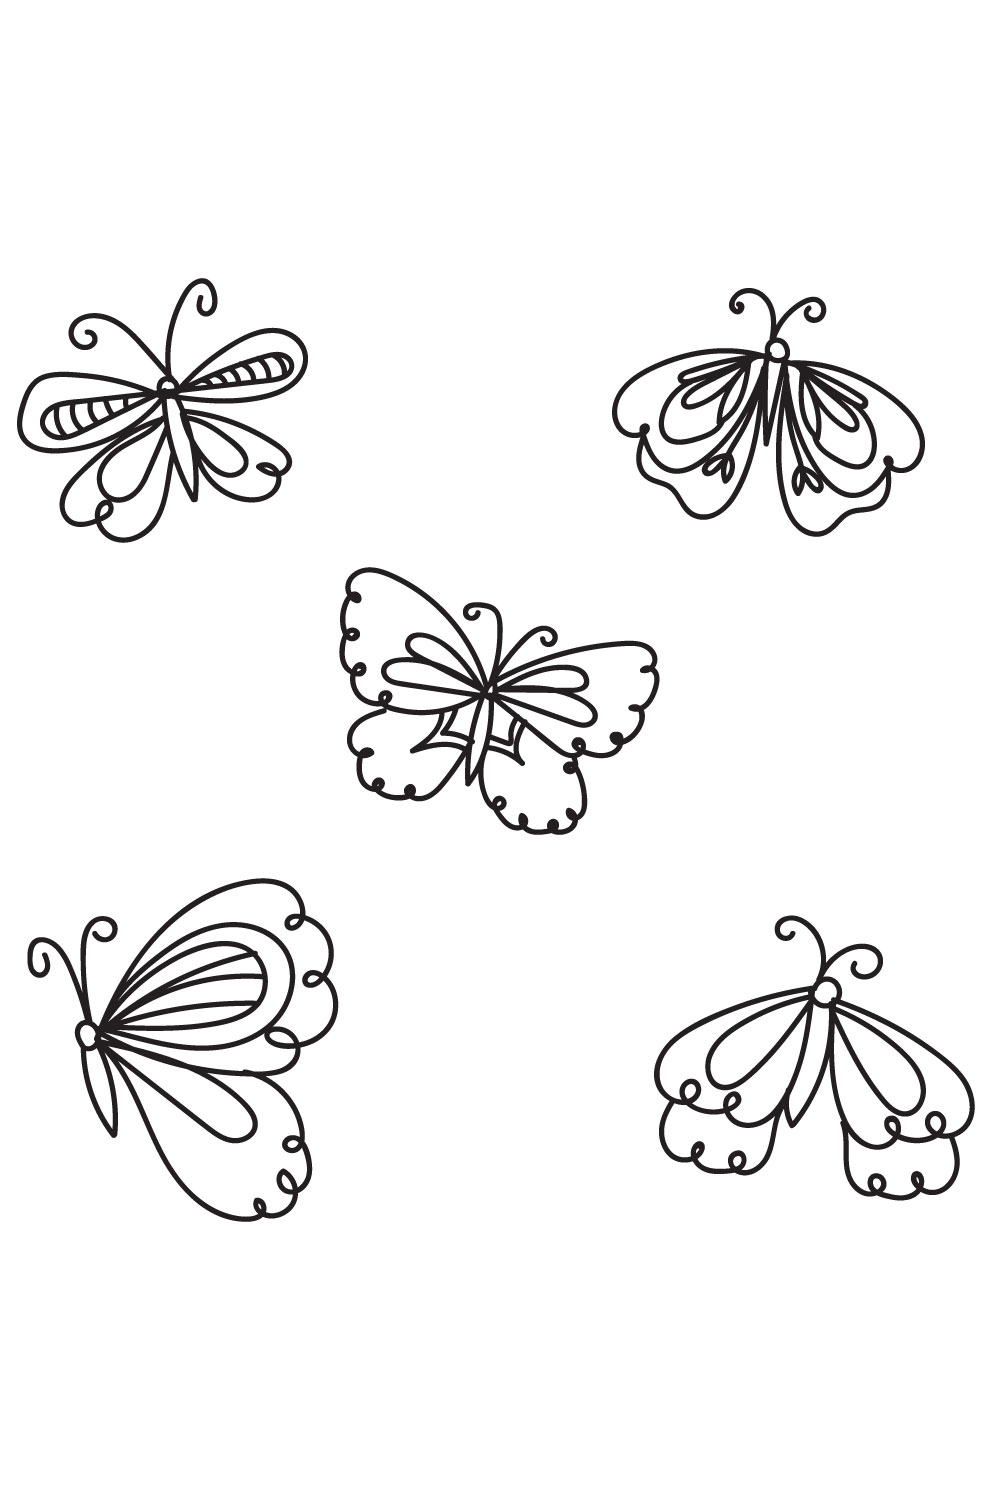 Four butterflies flying in the air.